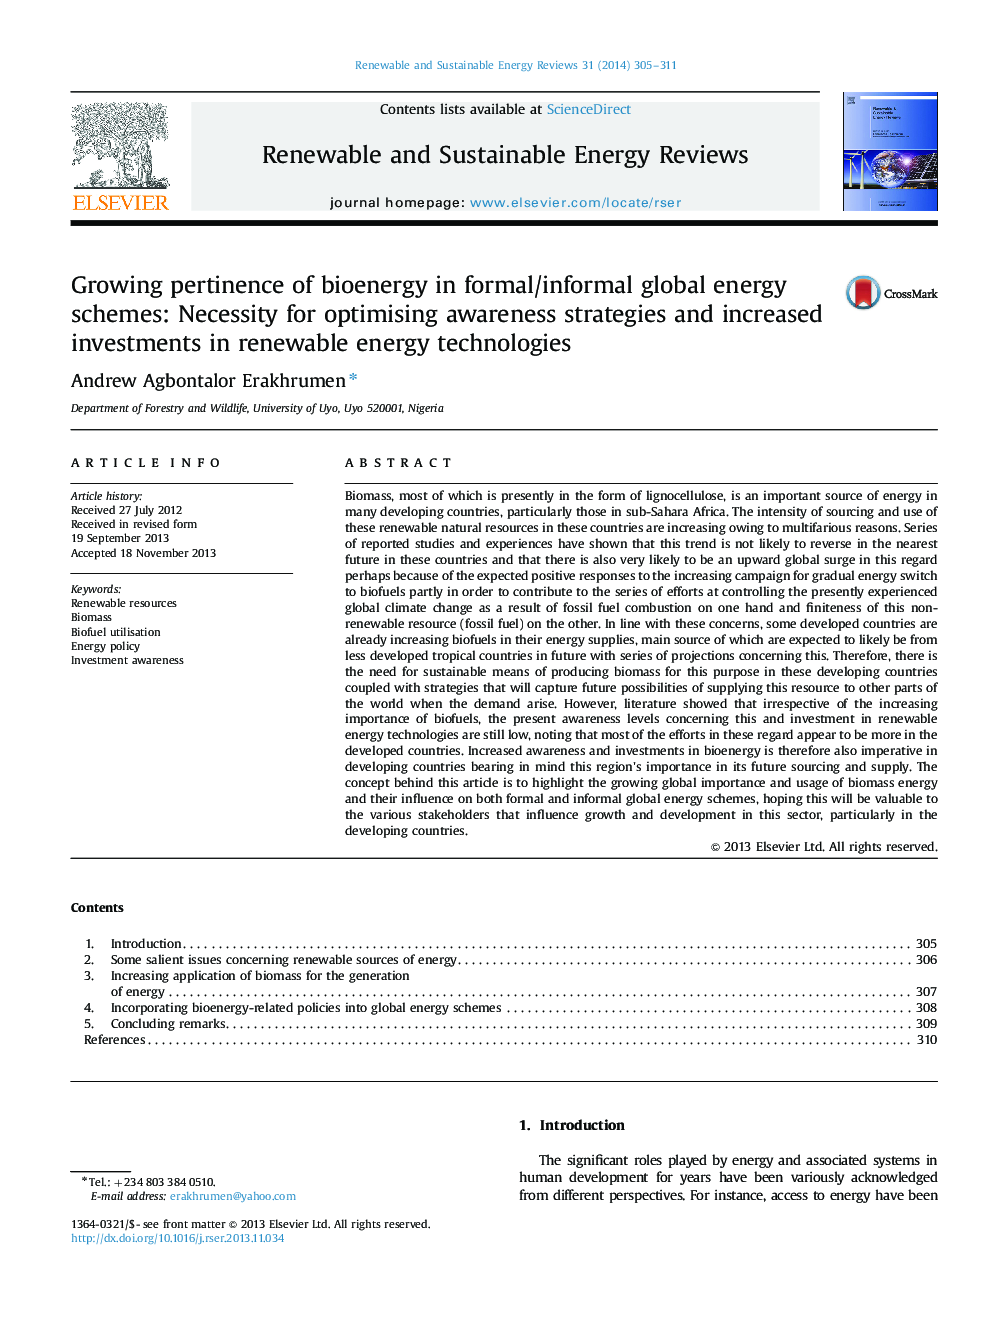 Growing pertinence of bioenergy in formal/informal global energy schemes: Necessity for optimising awareness strategies and increased investments in renewable energy technologies